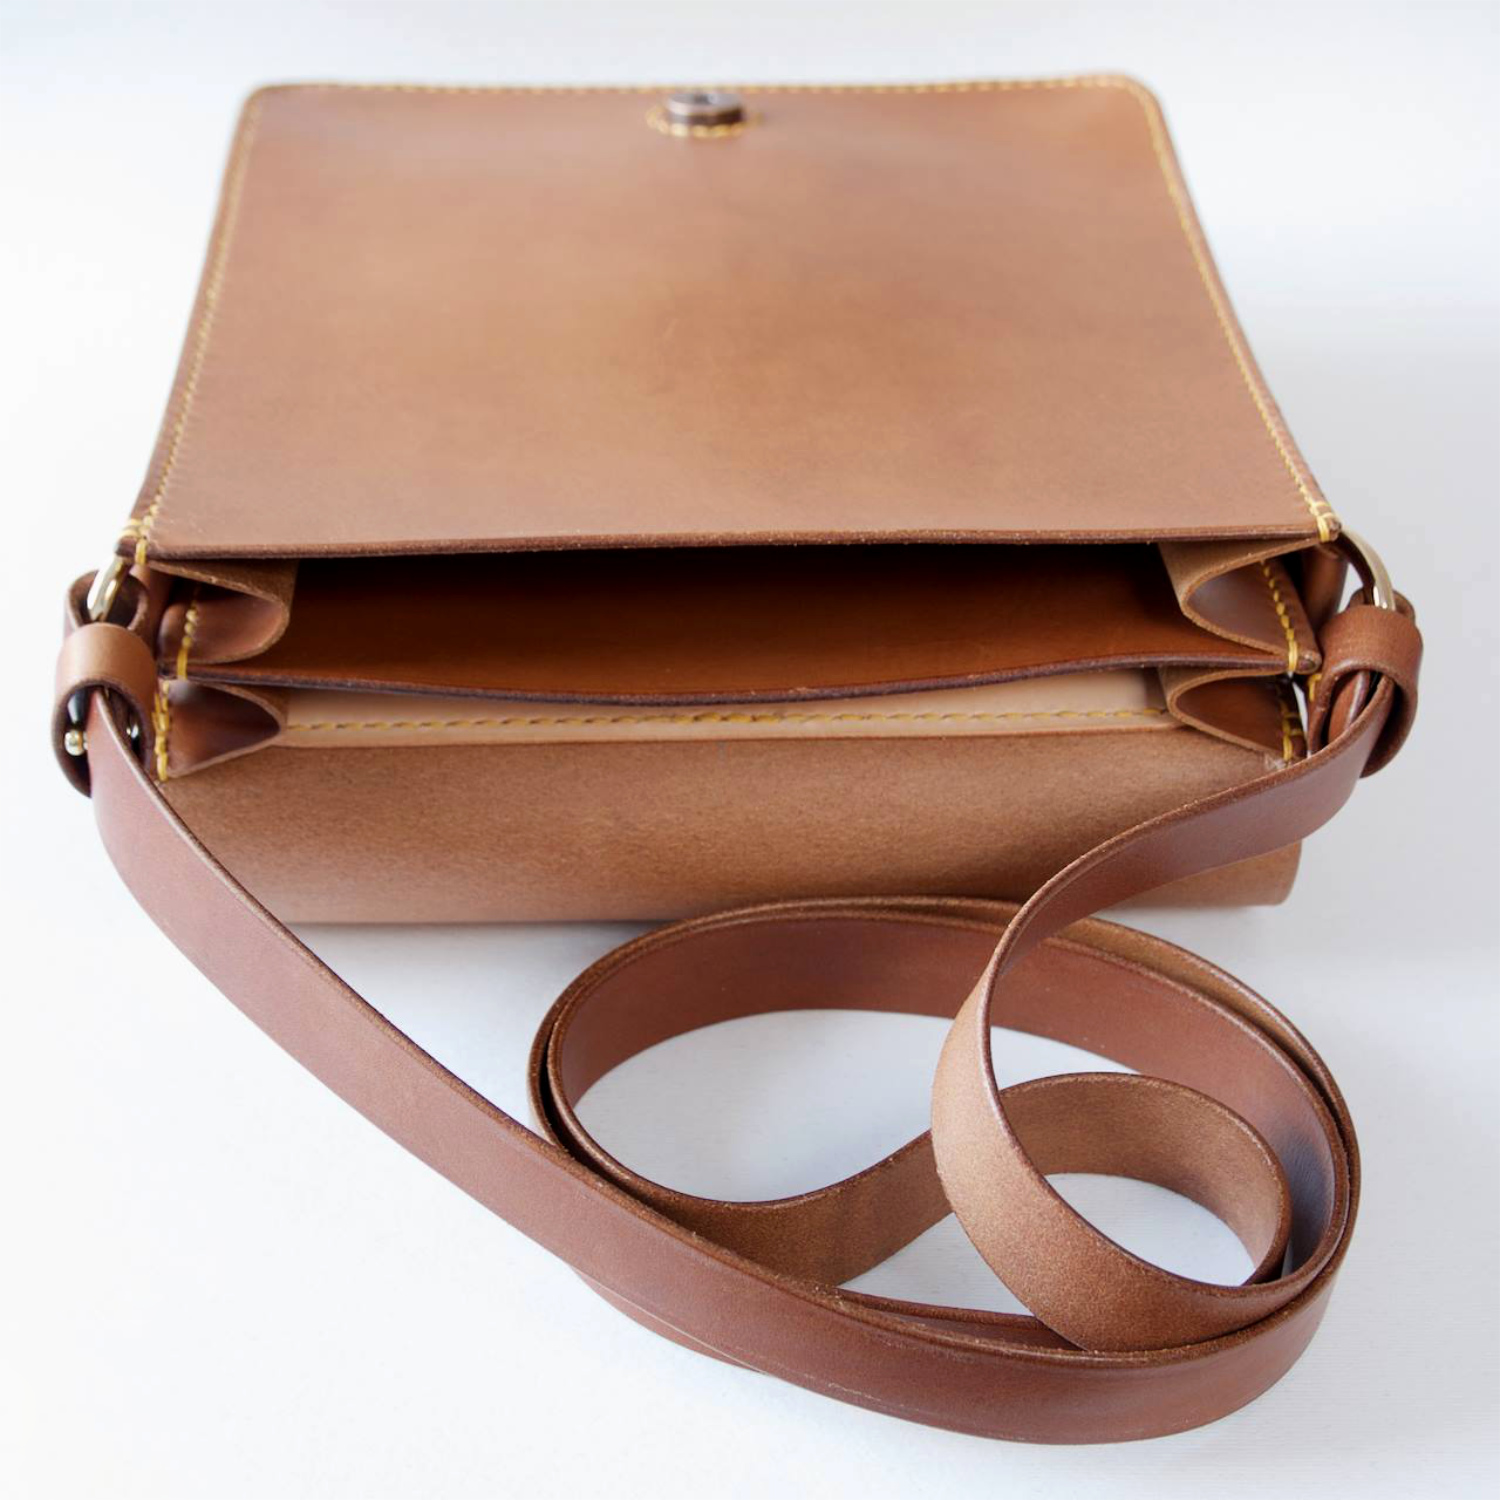 leather messenger bag with cover all flap inside view